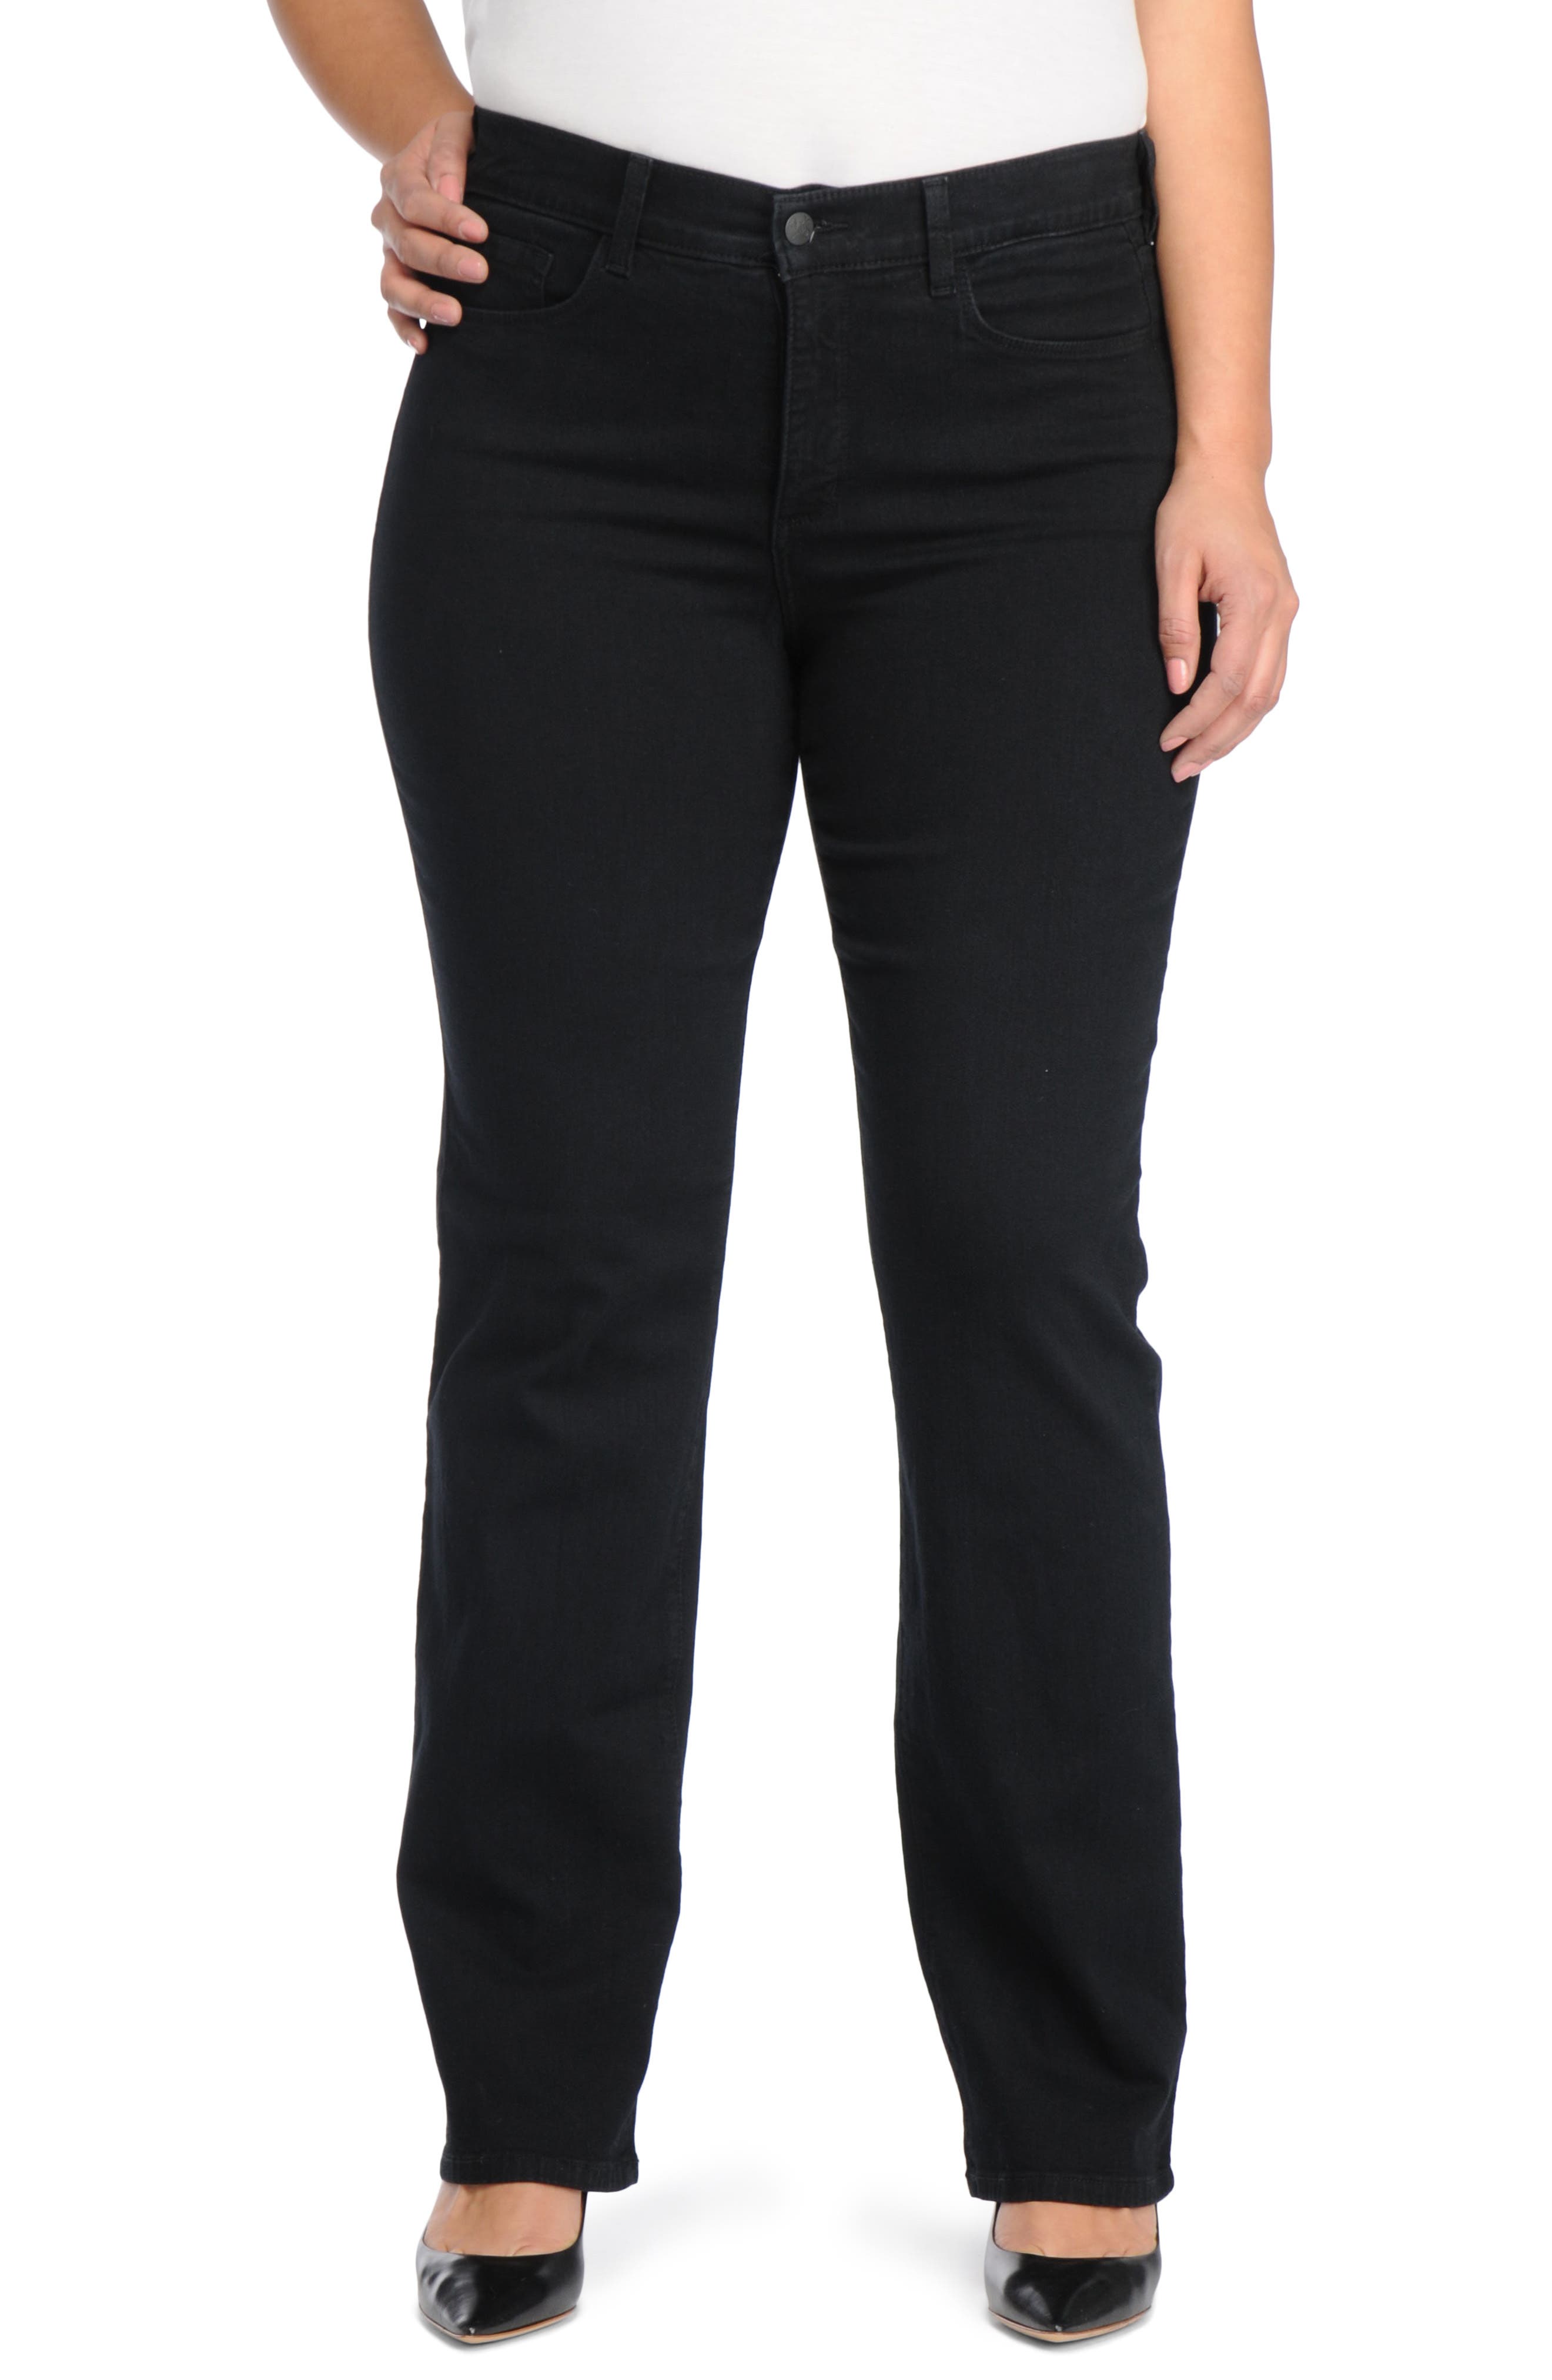 tall plus size womens jeans